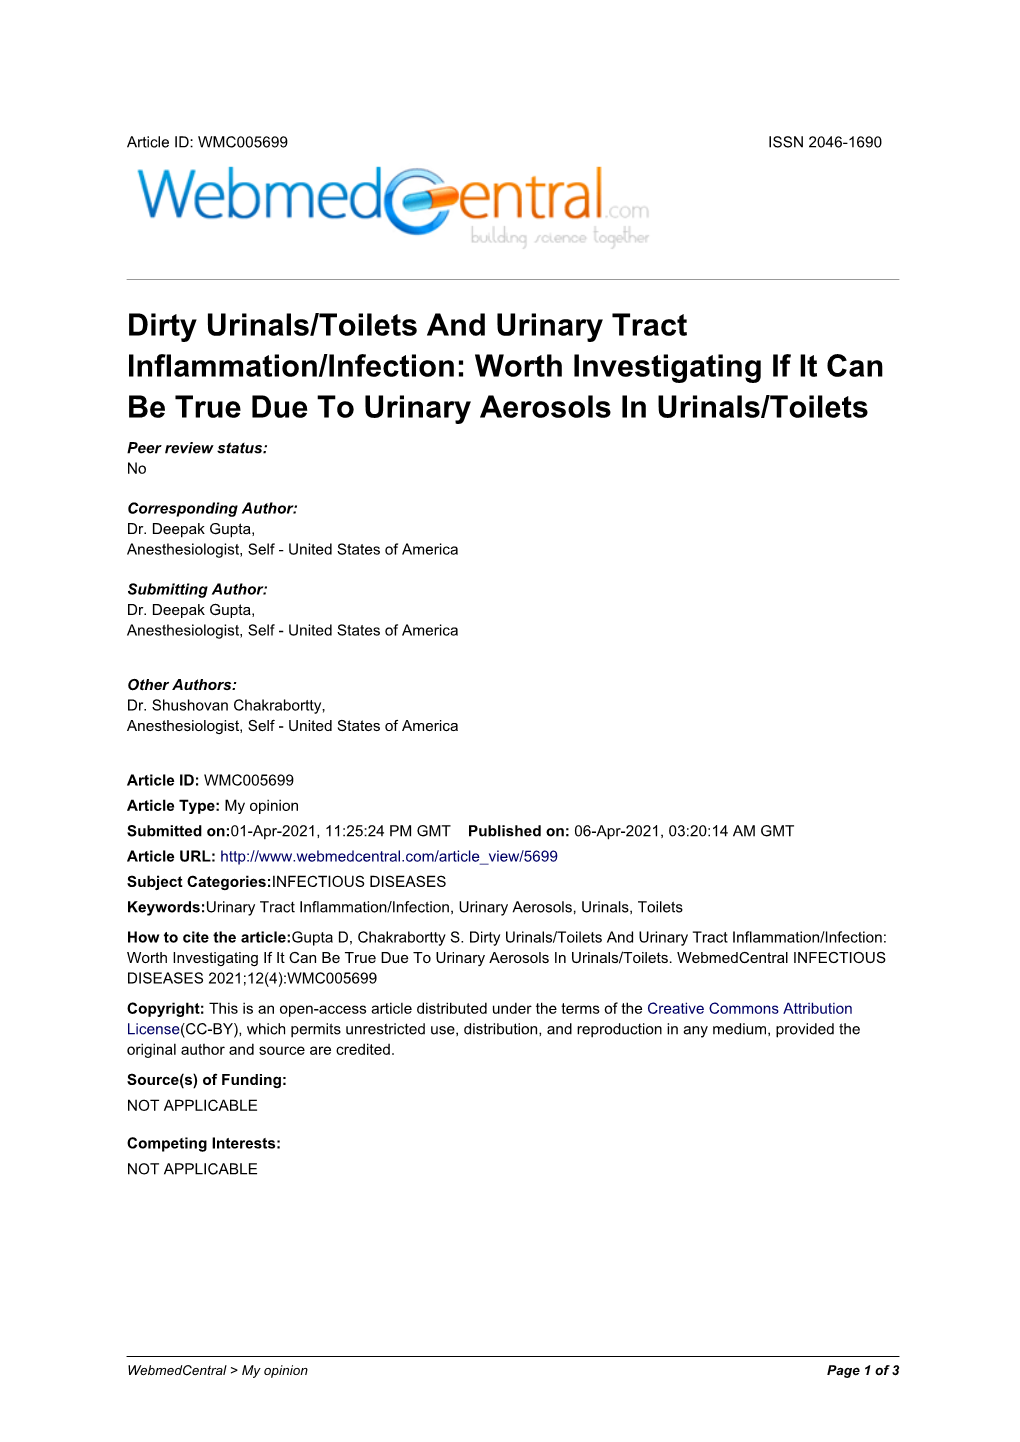 Dirty Urinals/Toilets and Urinary Tract Inflammation/Infection: Worth Investigating If It Can Be True Due to Urinary Aerosols in Urinals/Toilets